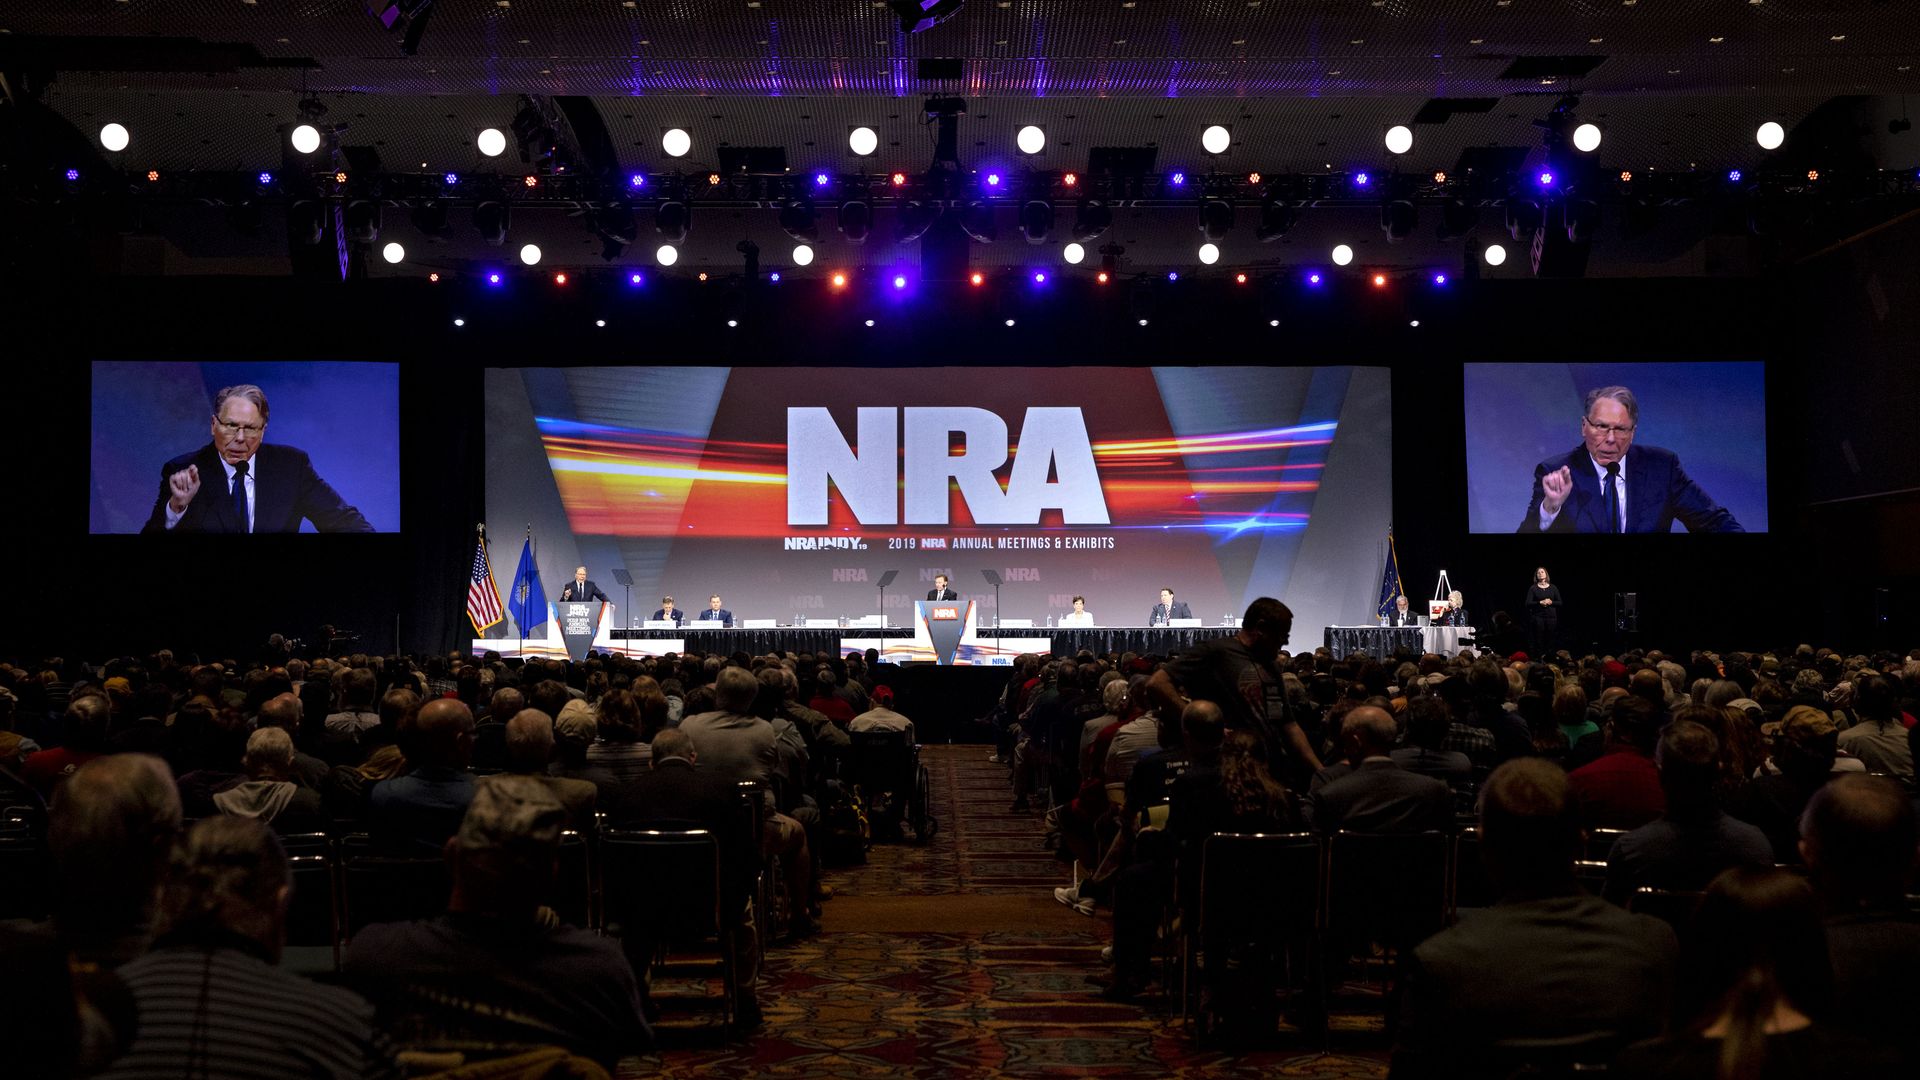 Photo of a person speaking from the stage at a conference with crowds of people and the NRA projected on a screen